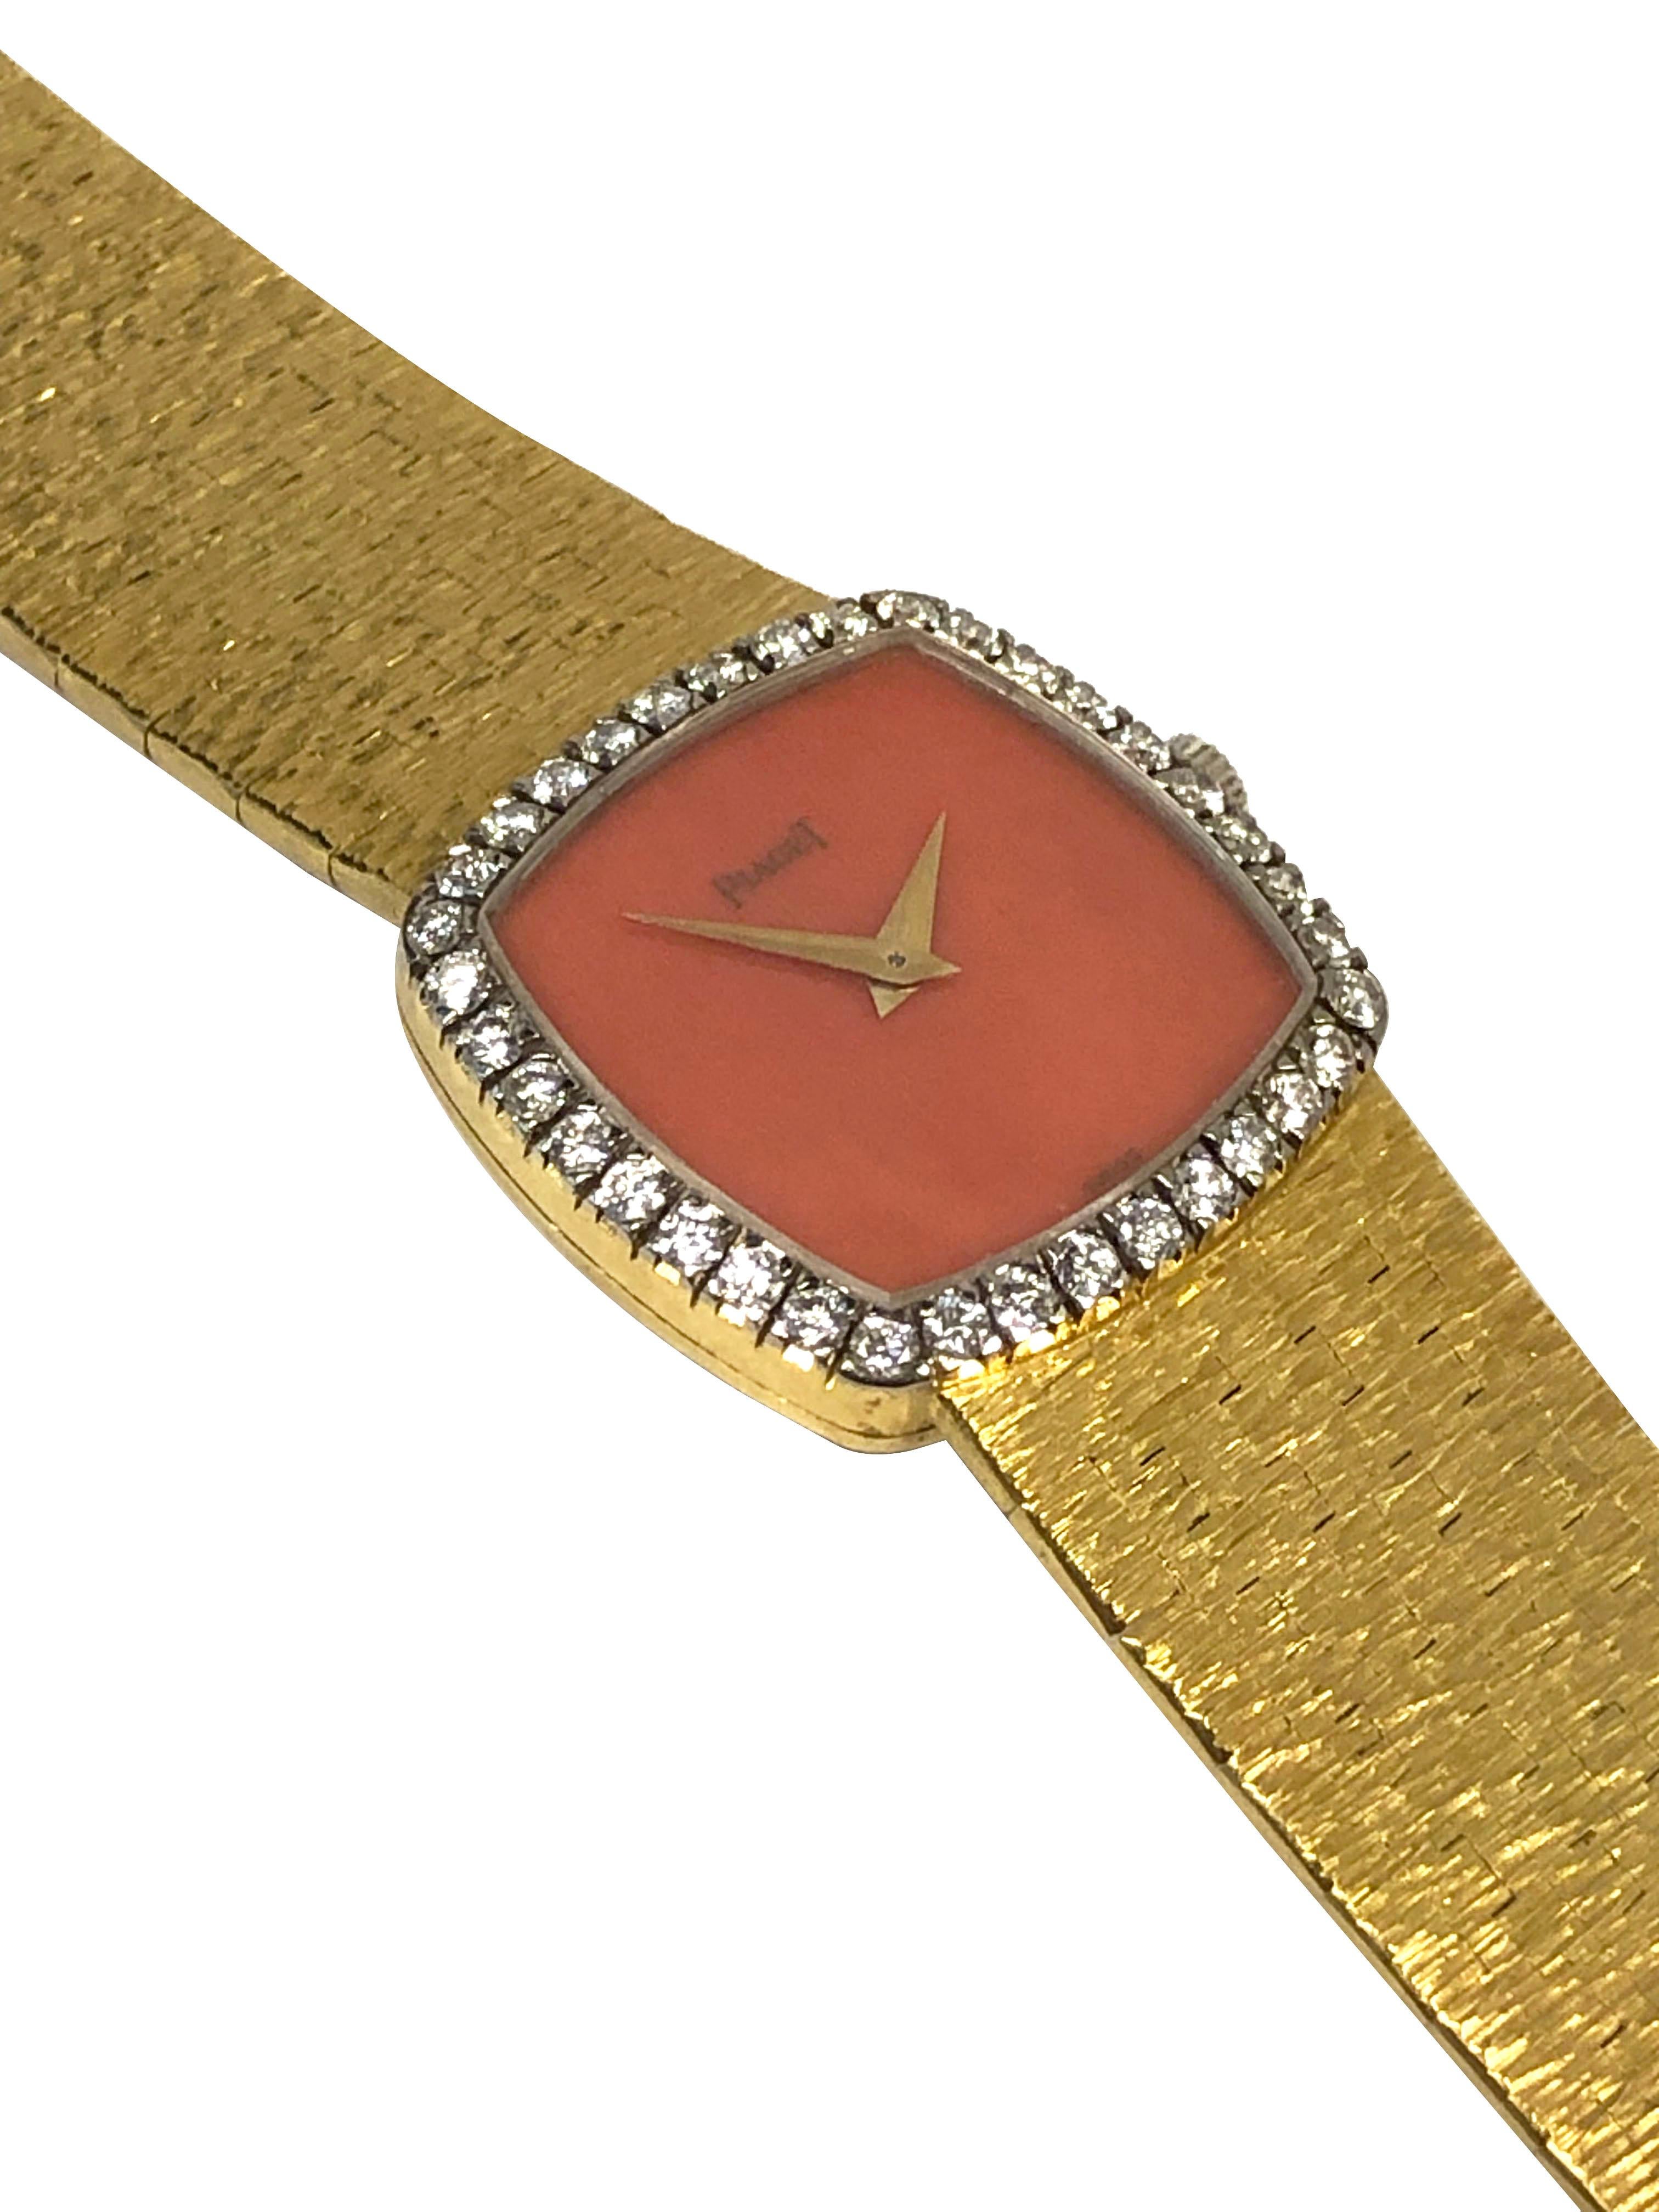 Circa 1970s Piaget Ladies Wrist Watch, 22 x 22 M.M. 18k Yellow Gold 2 piece case, Piaget Factory set Diamond Bezel of Round Brilliant cut Diamonds totaling approximately 1 carat. 17 jewel, mechanical, manual wind movement, Coral dial. 5/8 inch wide